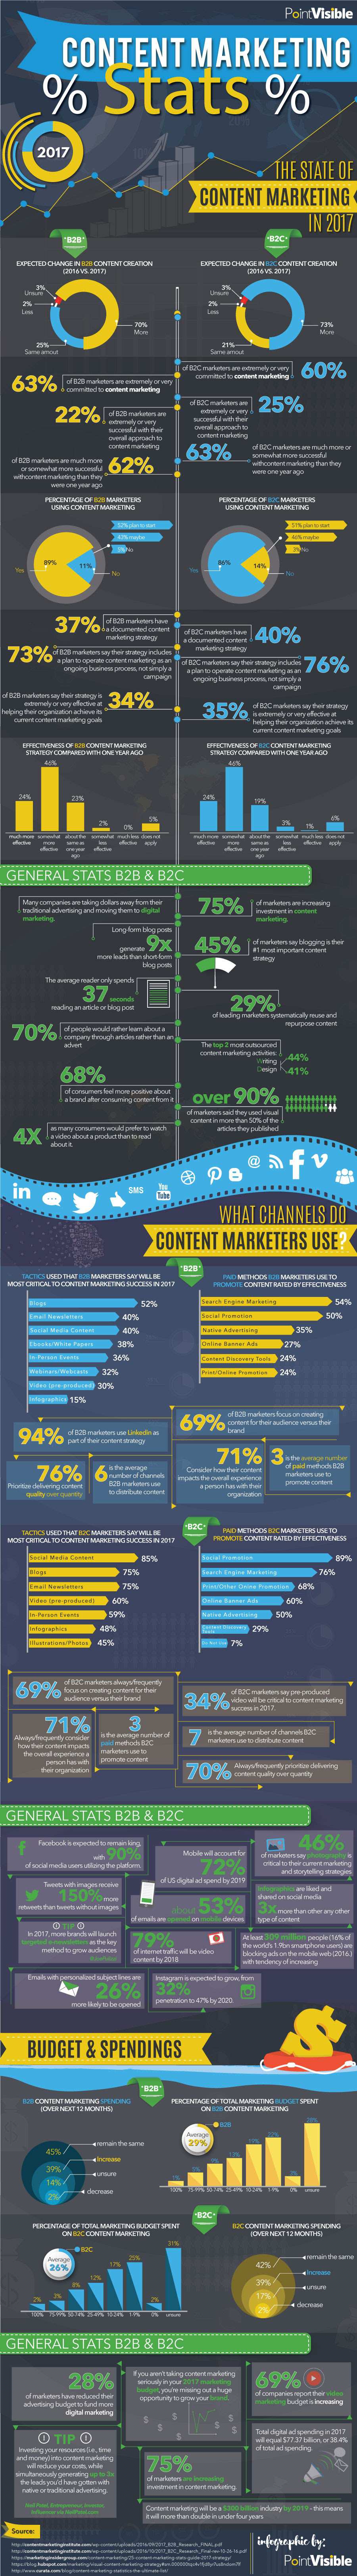 Content-Marketing-Stats-Infographic-2017